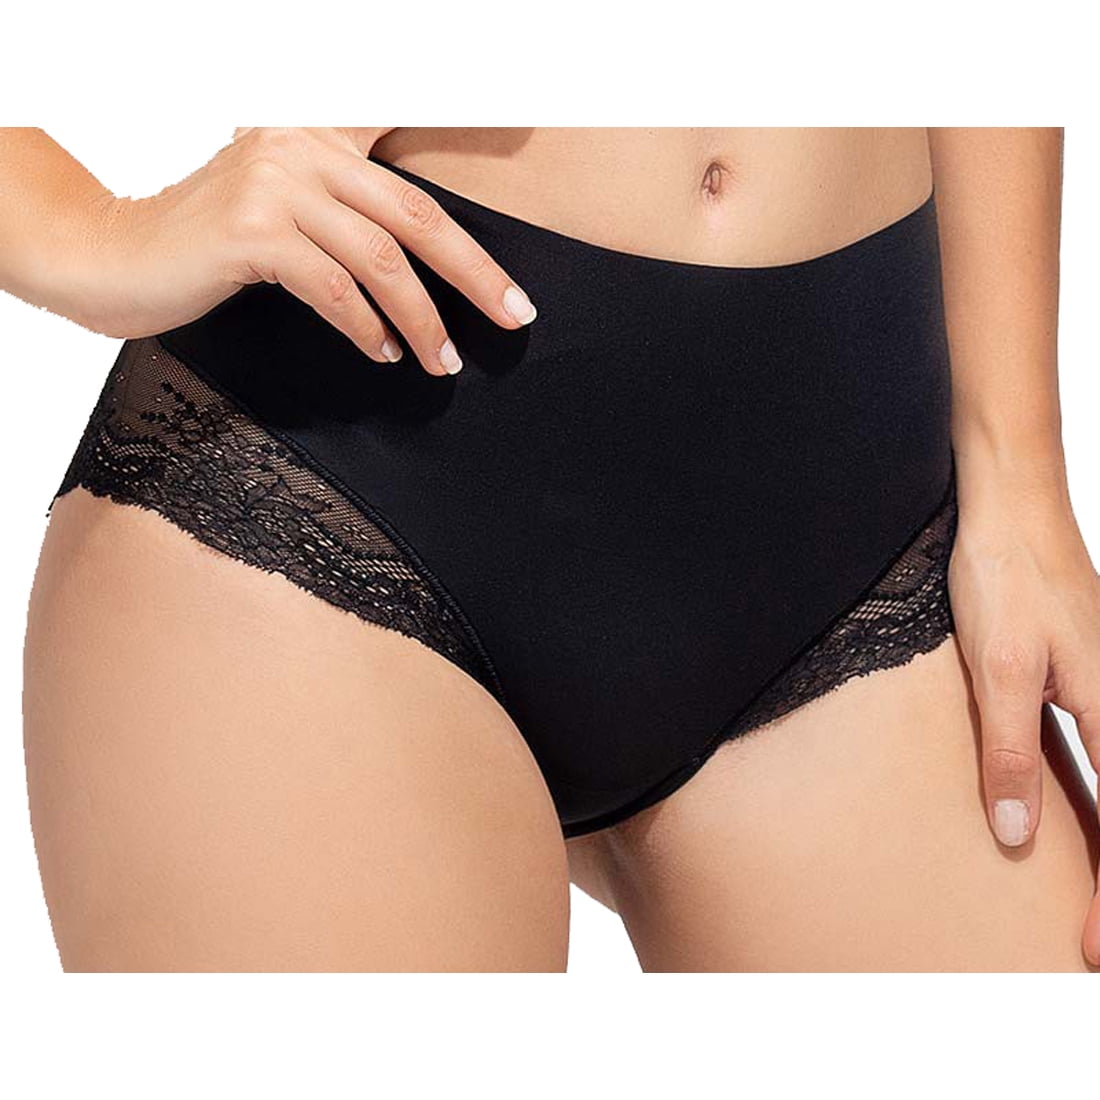 spanx women's undie-tectable lace hi-hipster panty black x-large